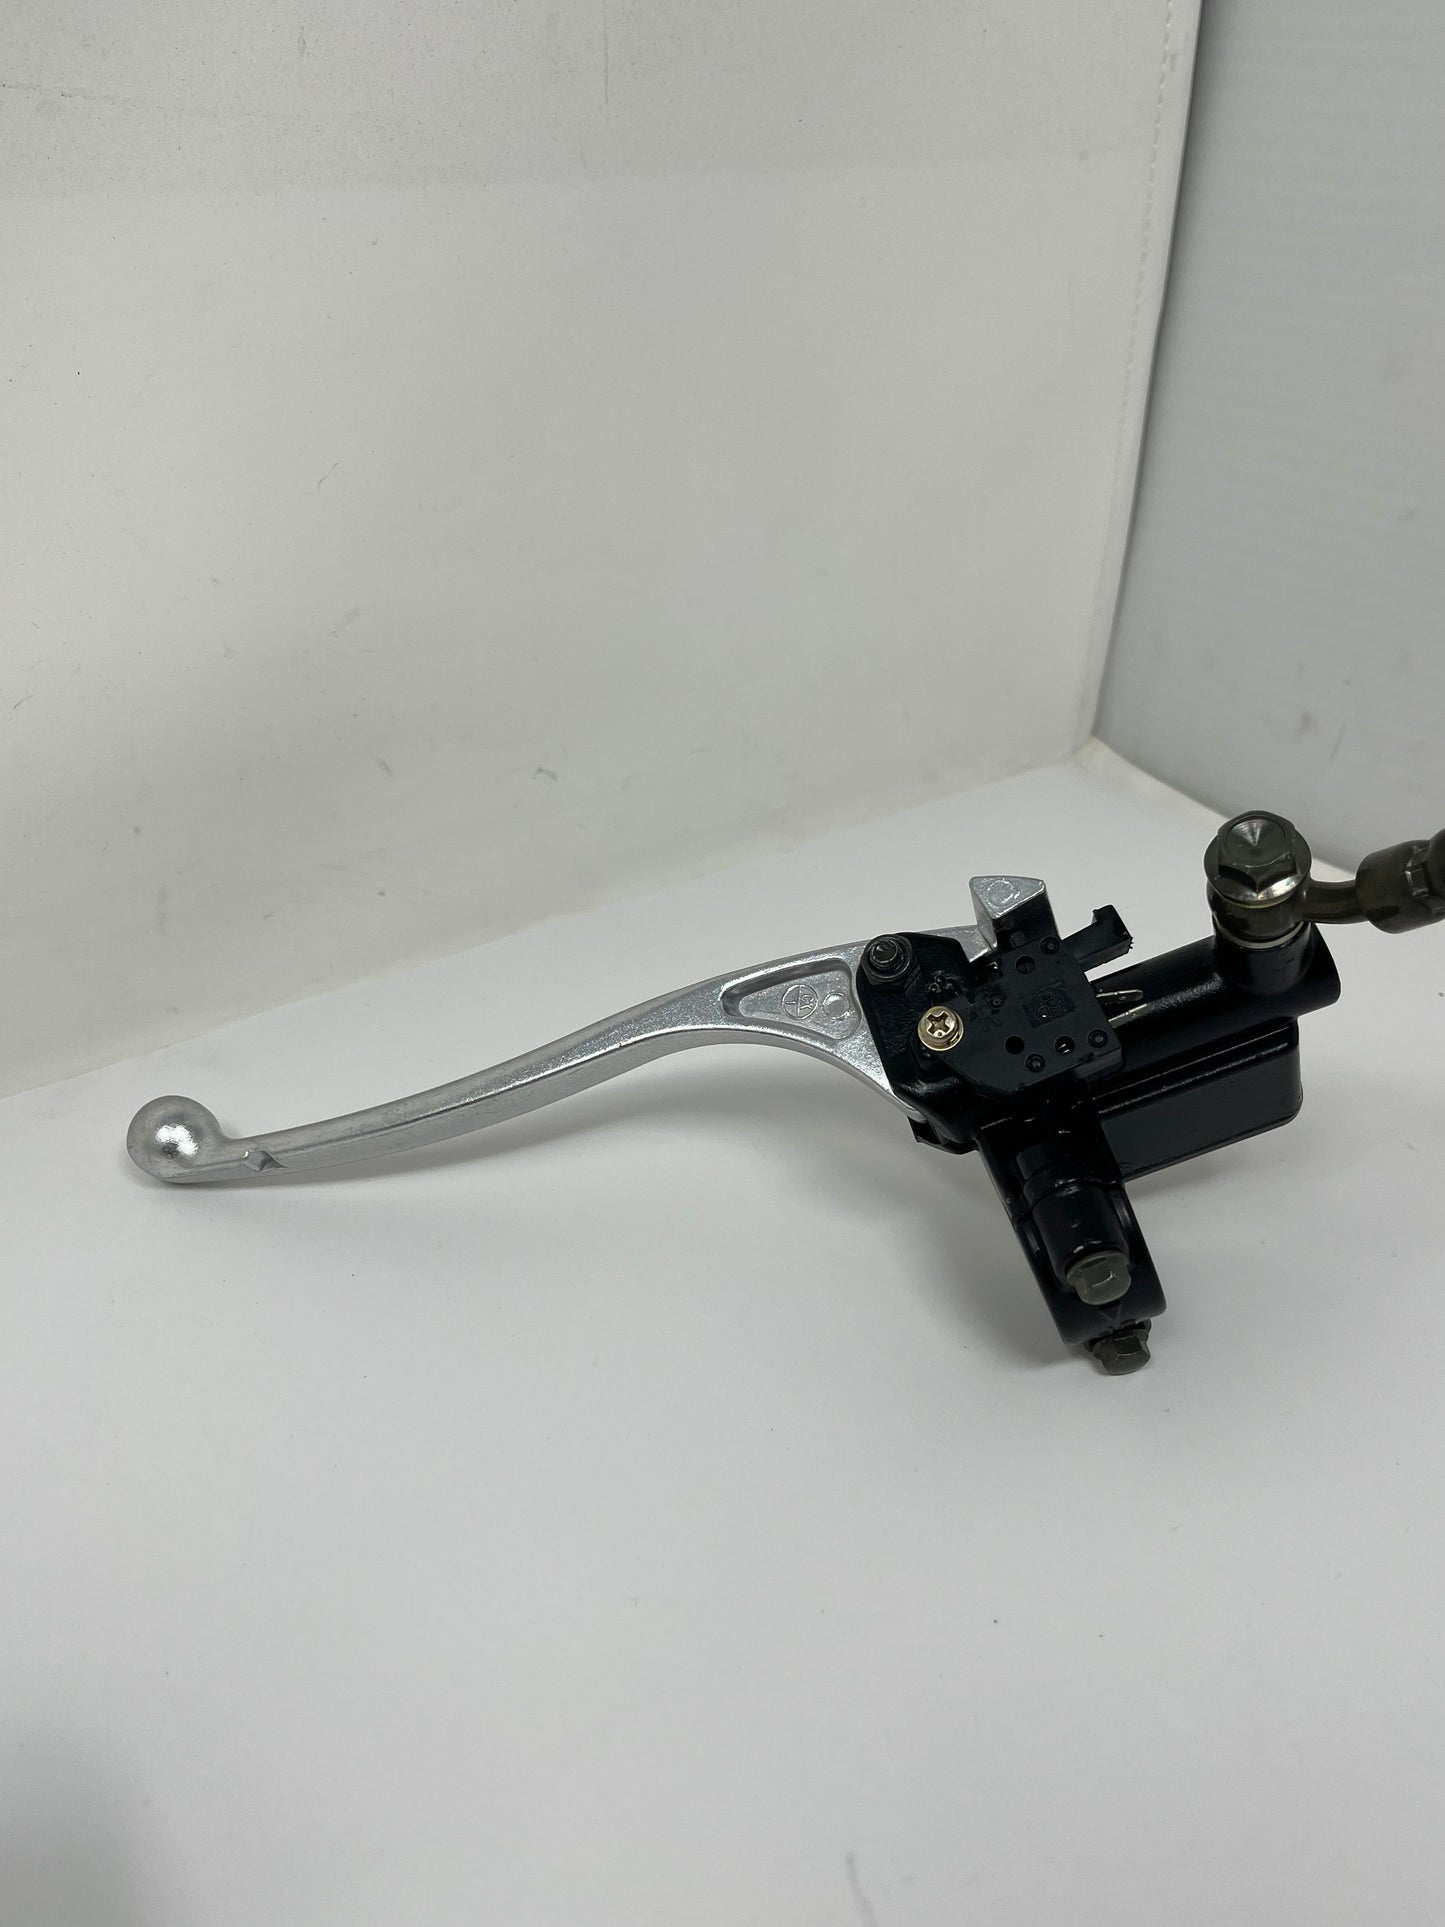 Part # 04020037 for sale. Part # 04010067. Front disc brake assembly for X18 50cc. DF50SST brake assembly parts for sale.